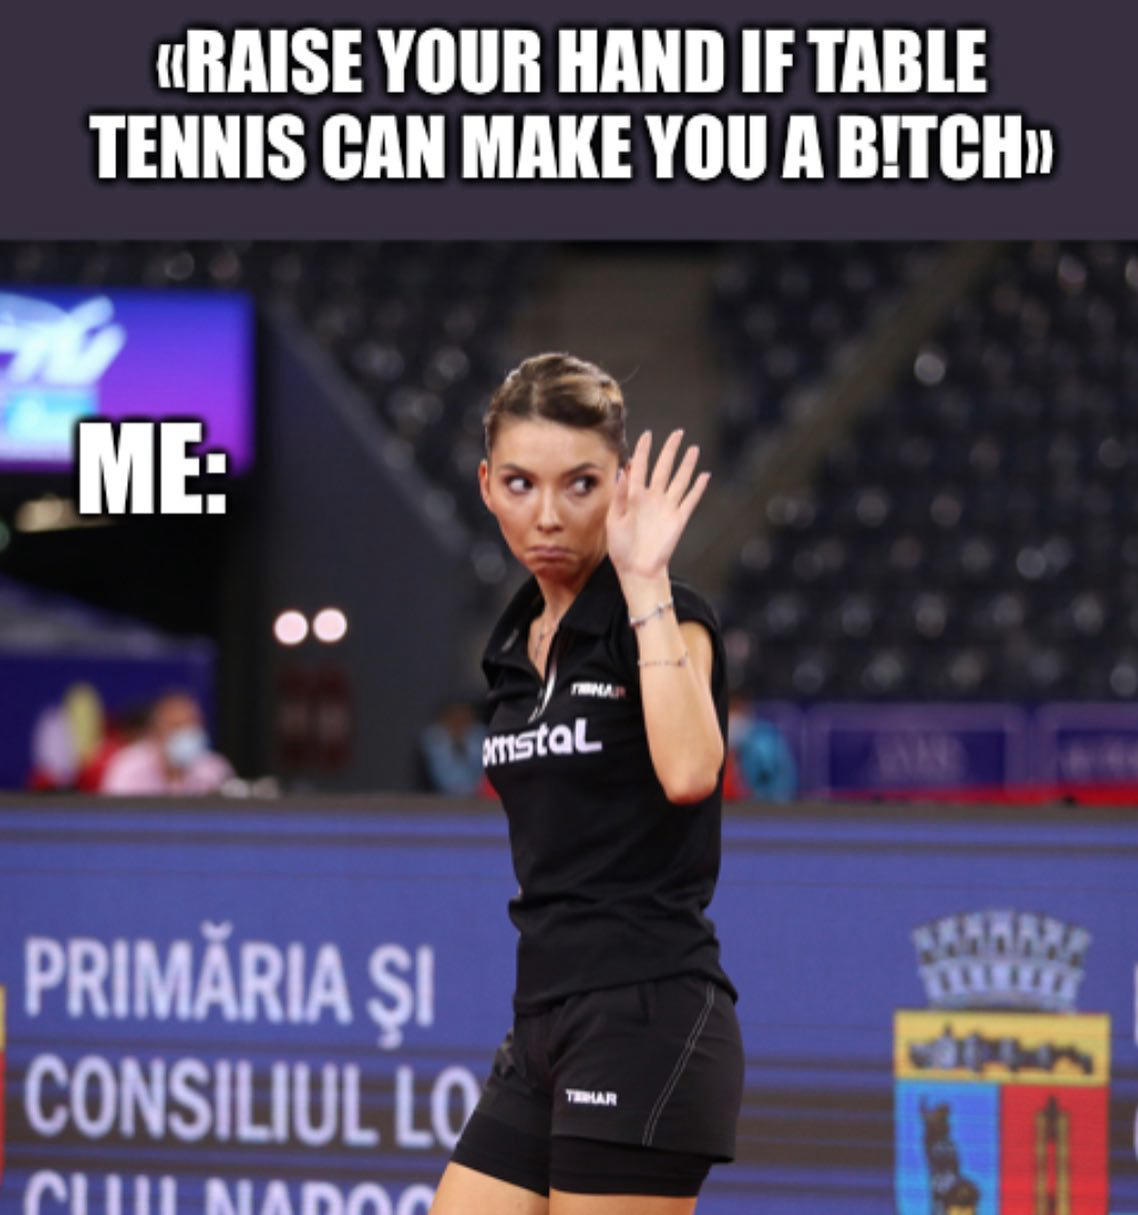 table tennis brings out the best and worst in me… anyone else